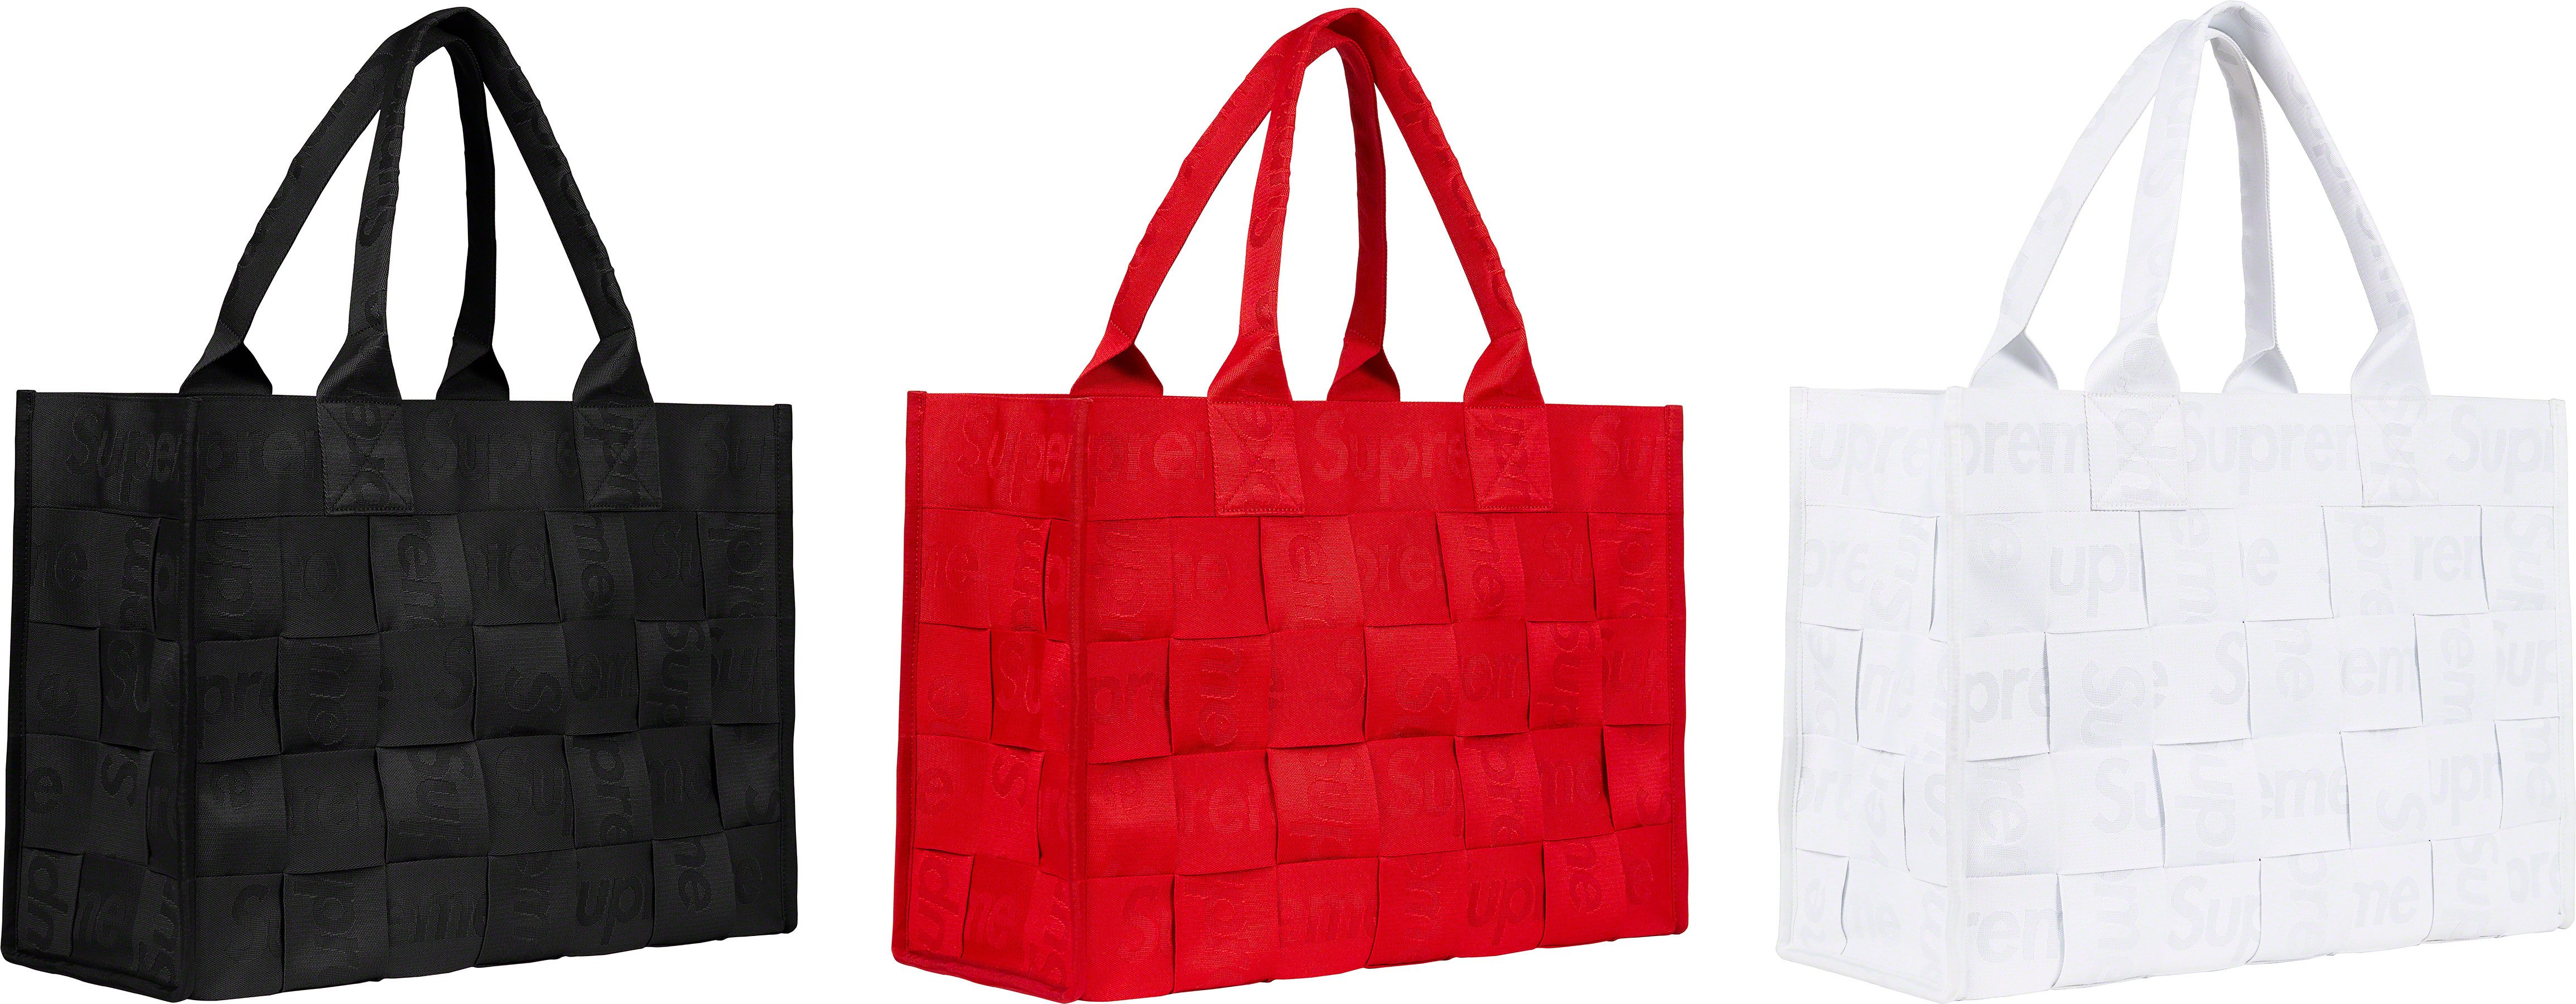 Tote『Supreme』/シュプリーム Woven Large Tote トートバッグ